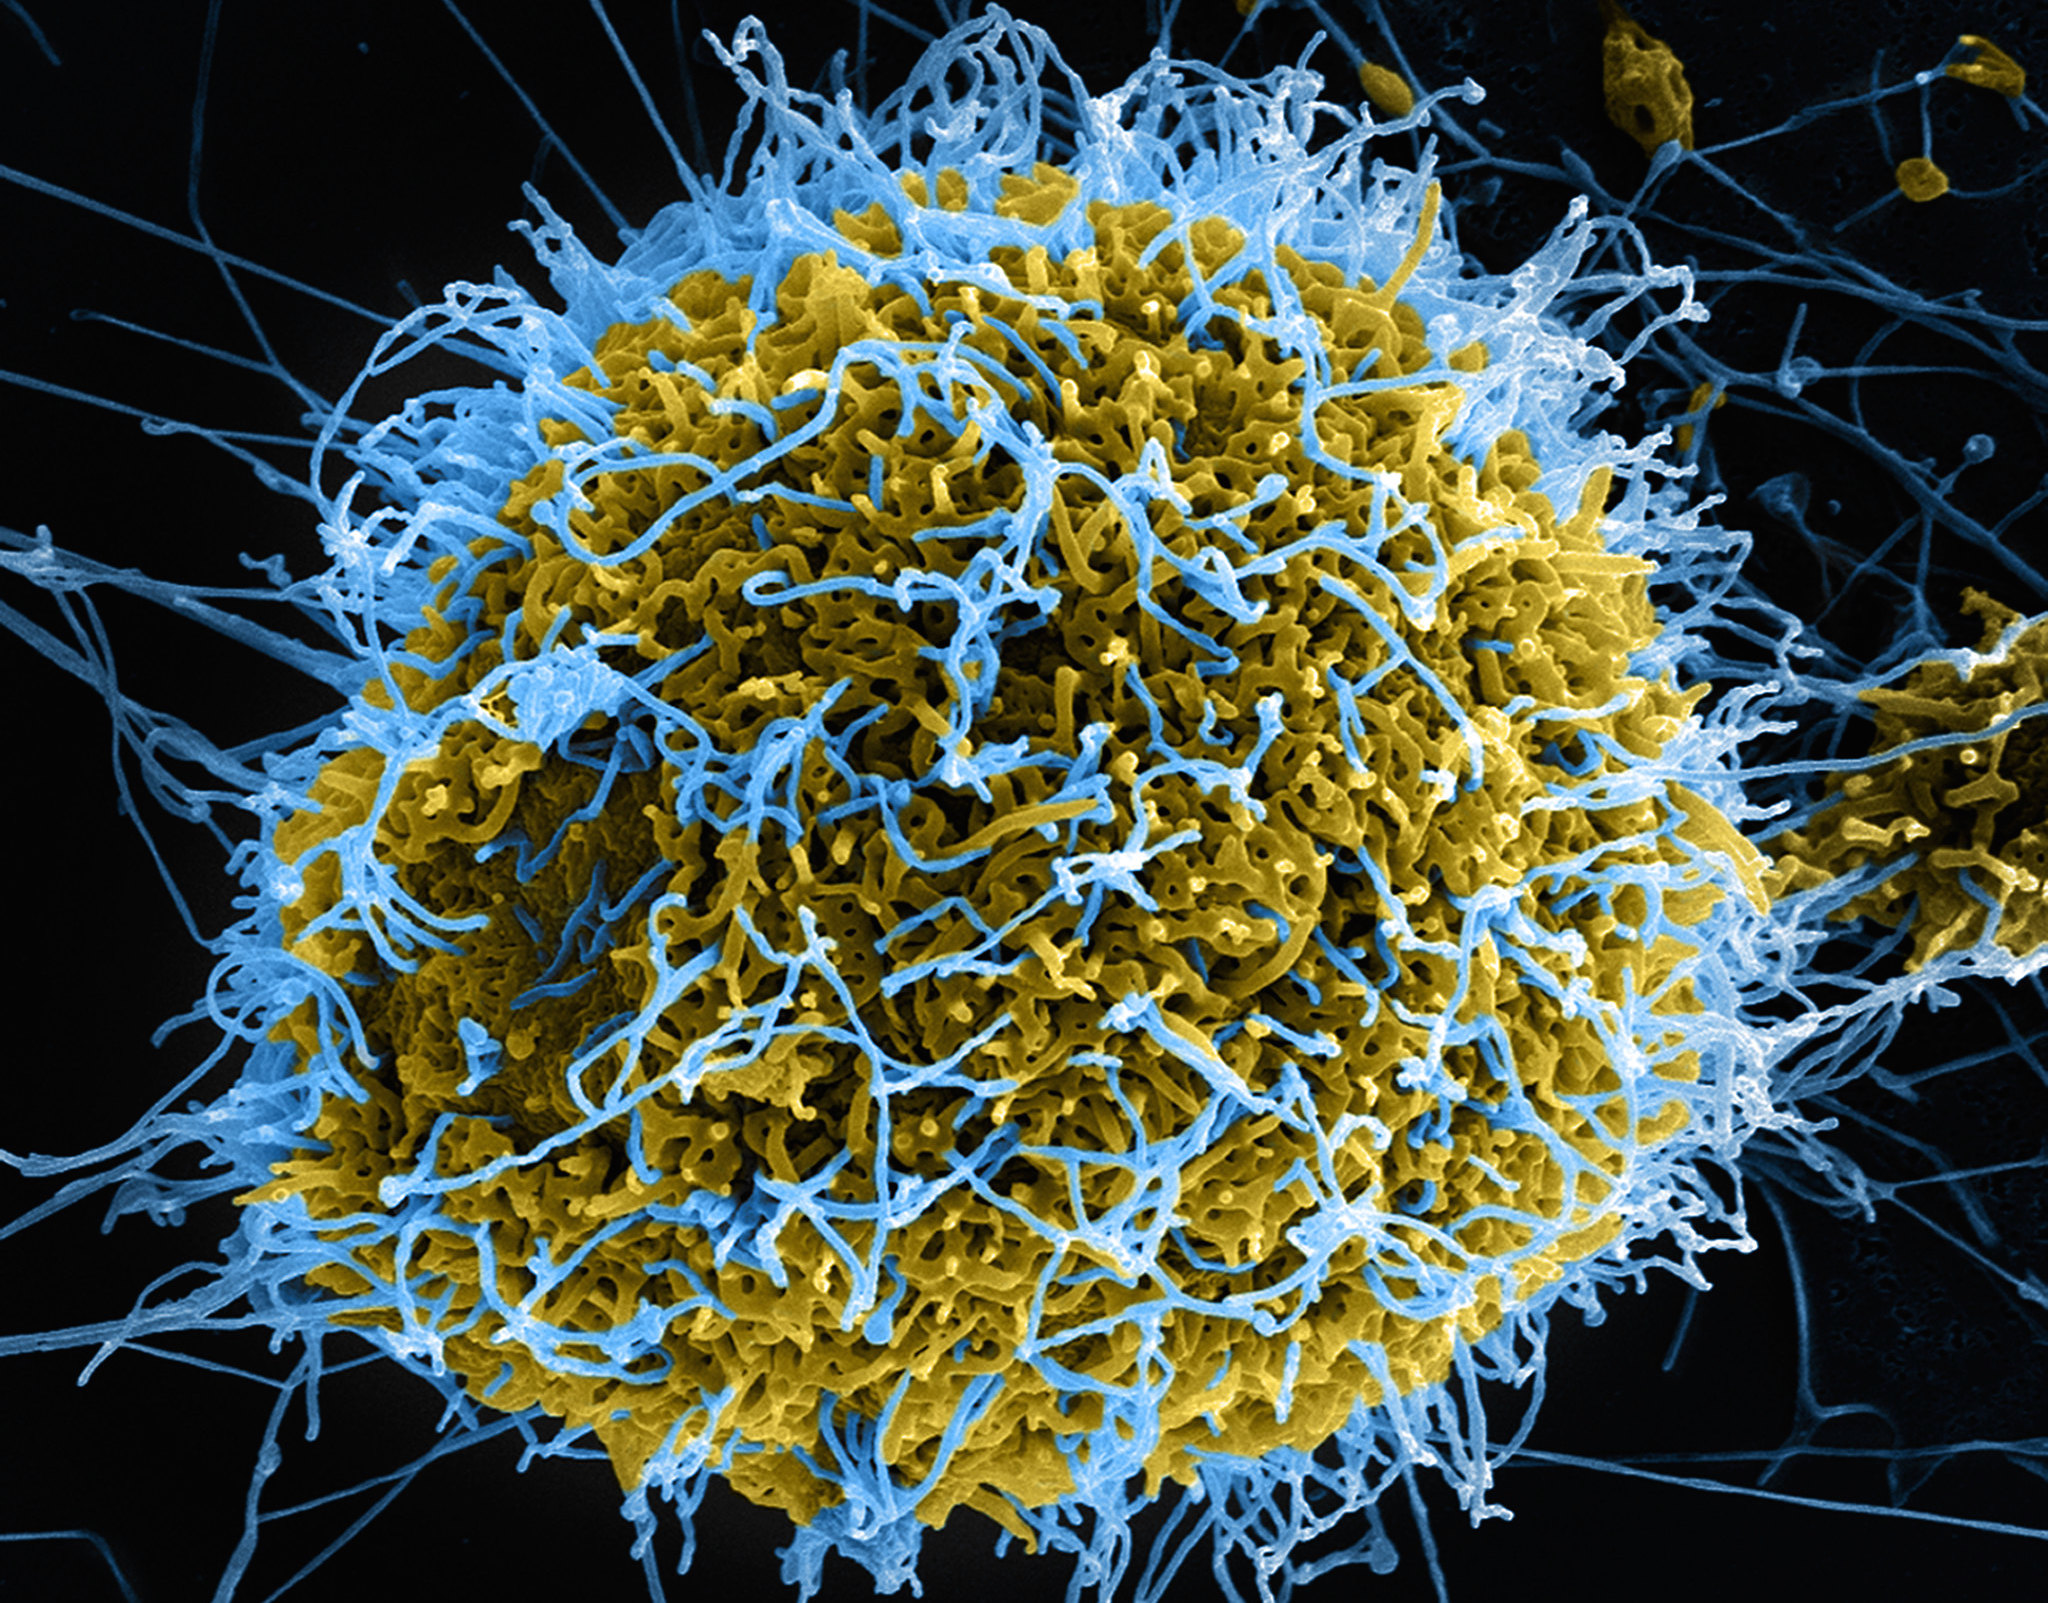 Using A 'Decoy' Method, The New Ebola Vaccine Could Help Contain Outbreaks - Texas Standard